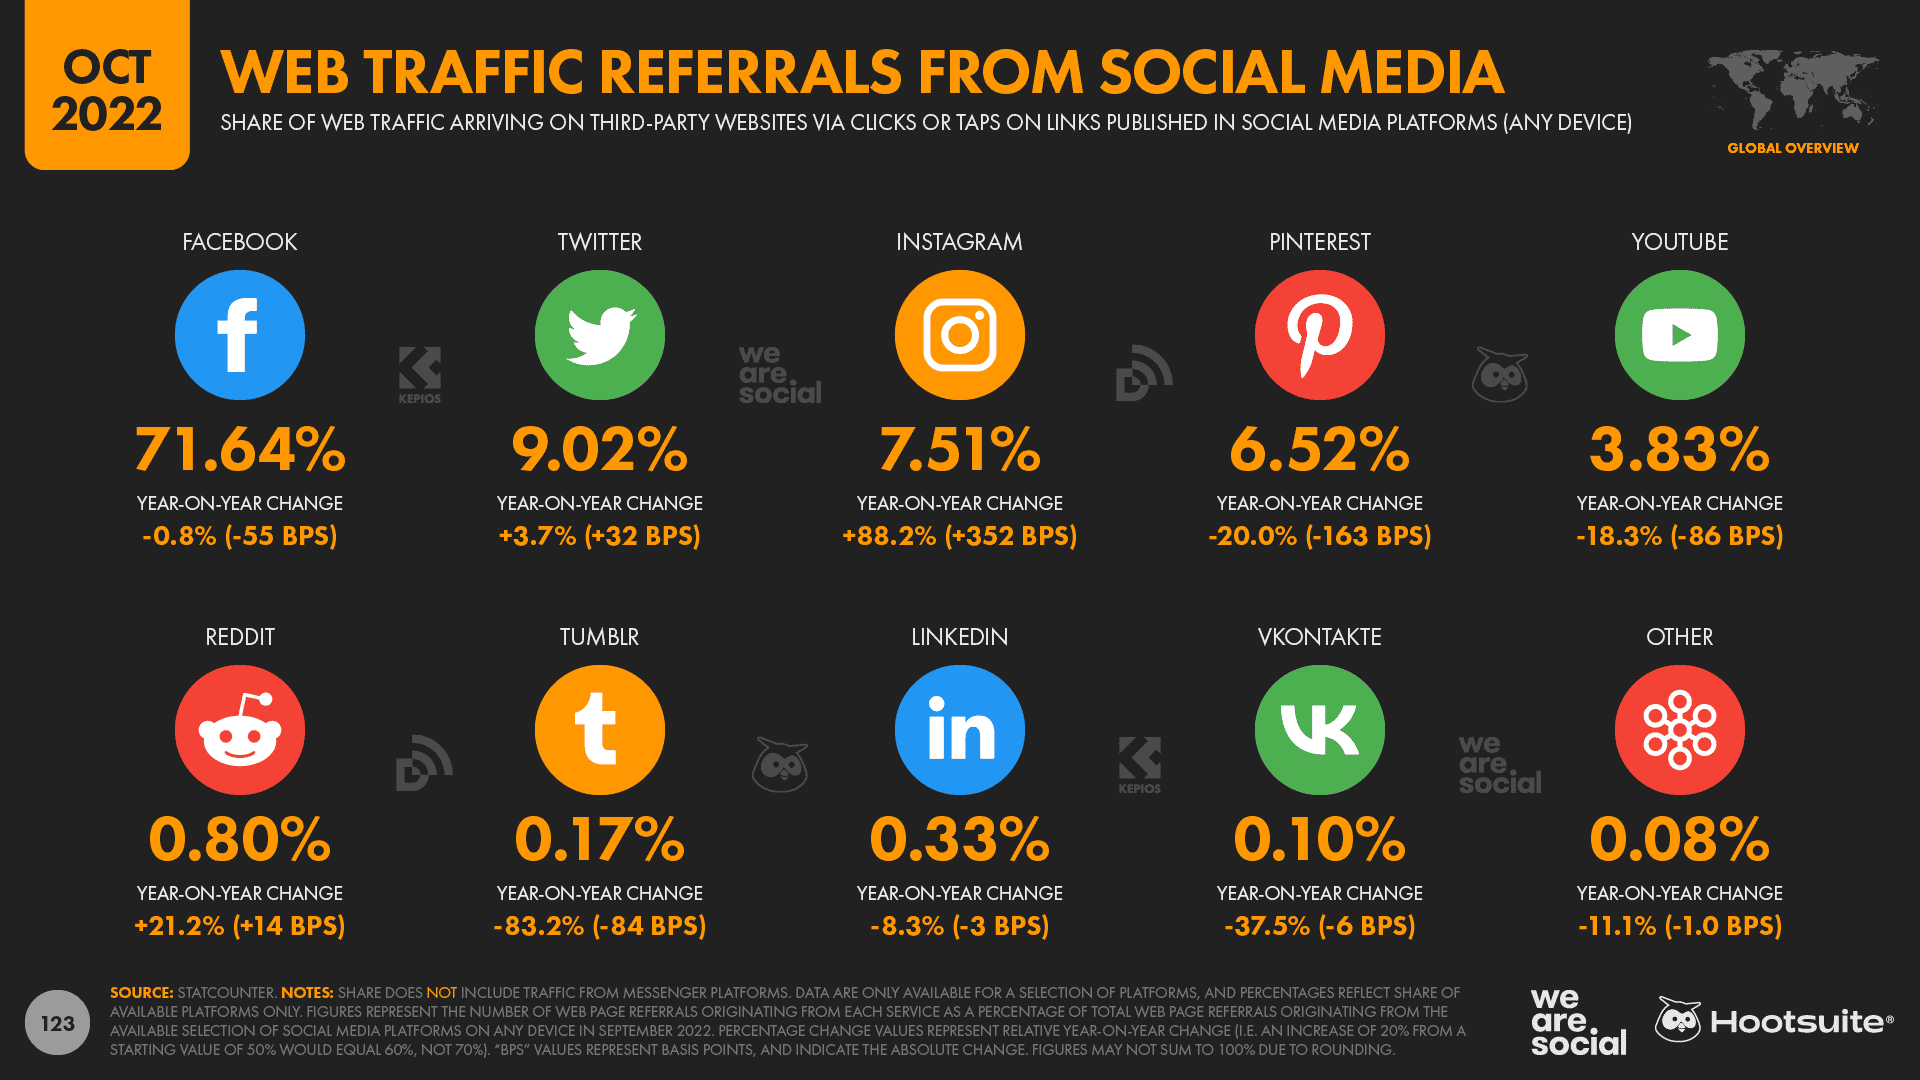 Chart showing web traffic referrals from social media